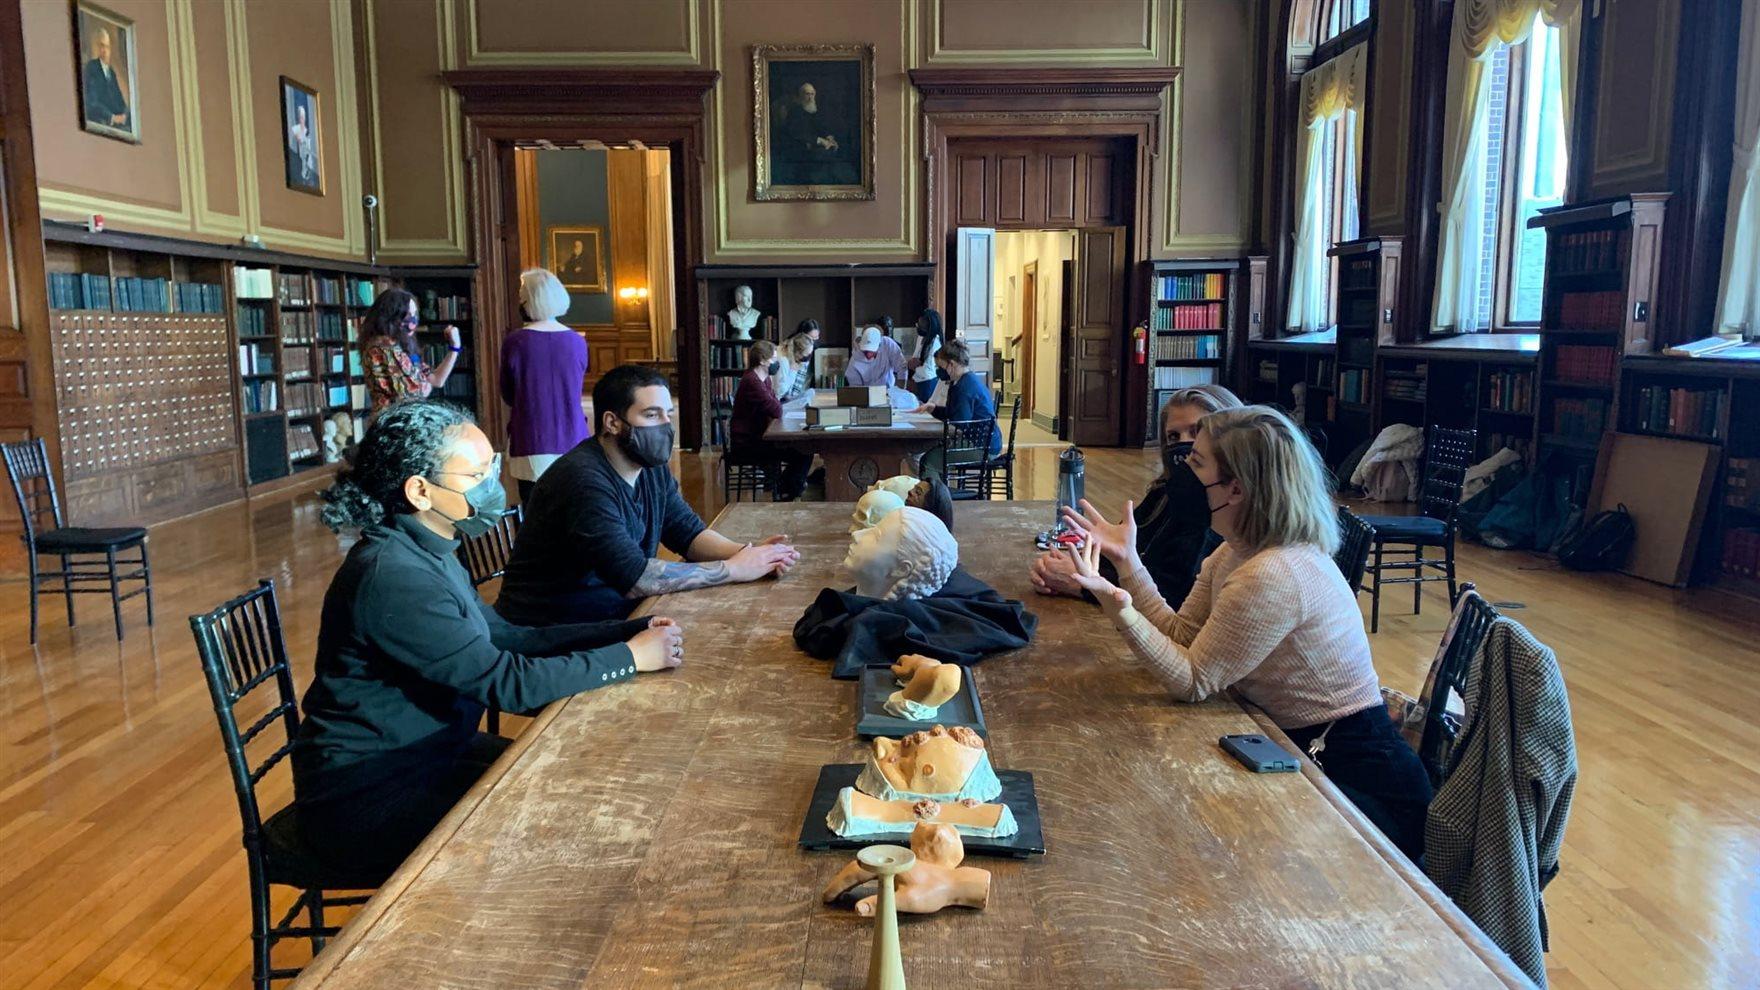 Students seated at a table during a class visit to the M&#252;tter Museum that employed historic artifacts and discussions. Photo courtesy Jacqui Bowman.